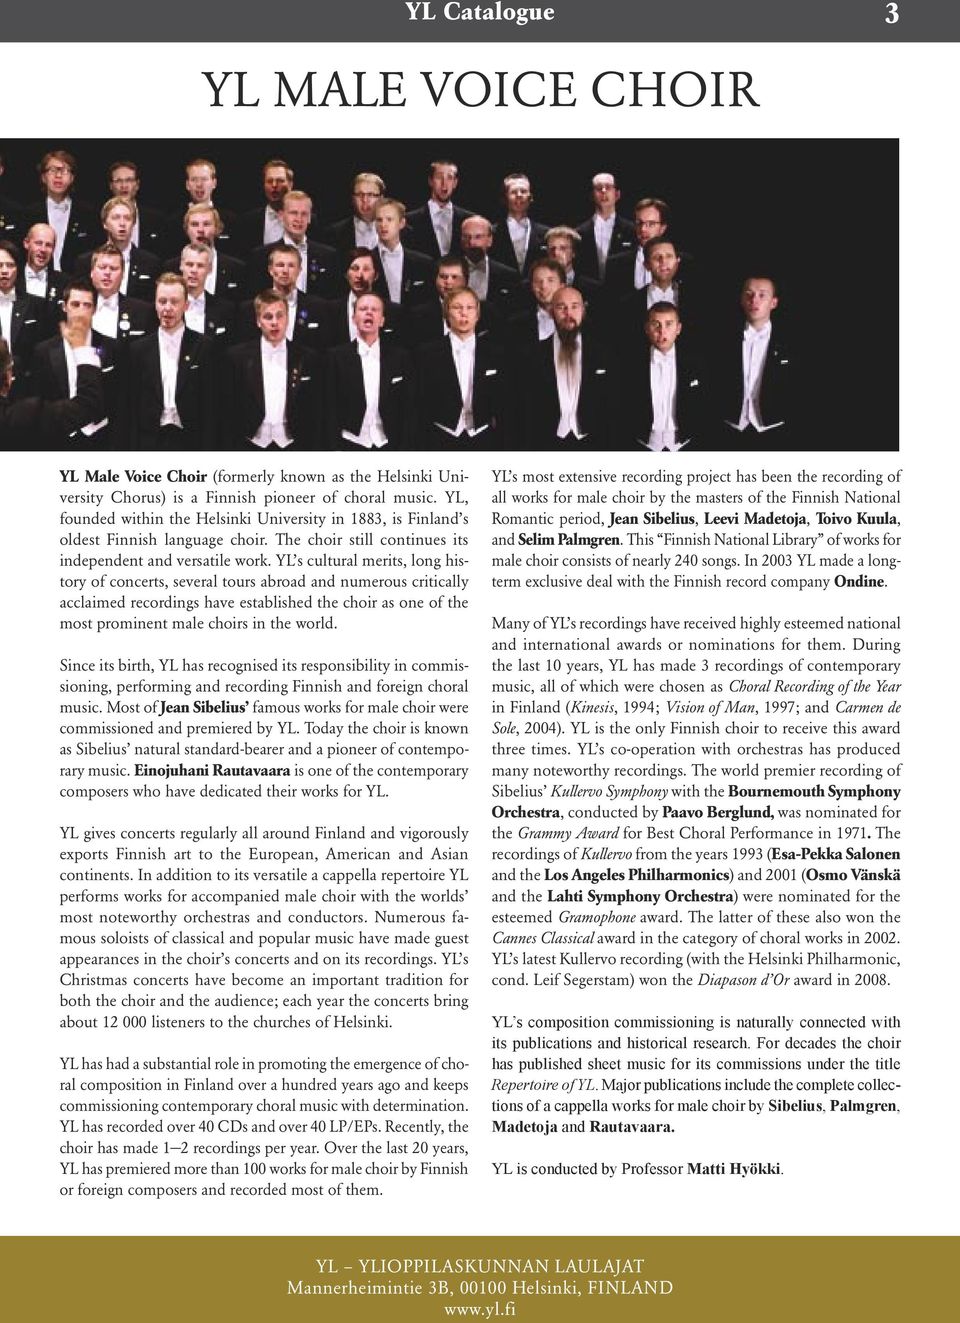 YL s cultural merits, long history of concerts, several tours abroad and numerous critically acclaimed recordings have established the choir as one of the most prominent male choirs in the world.